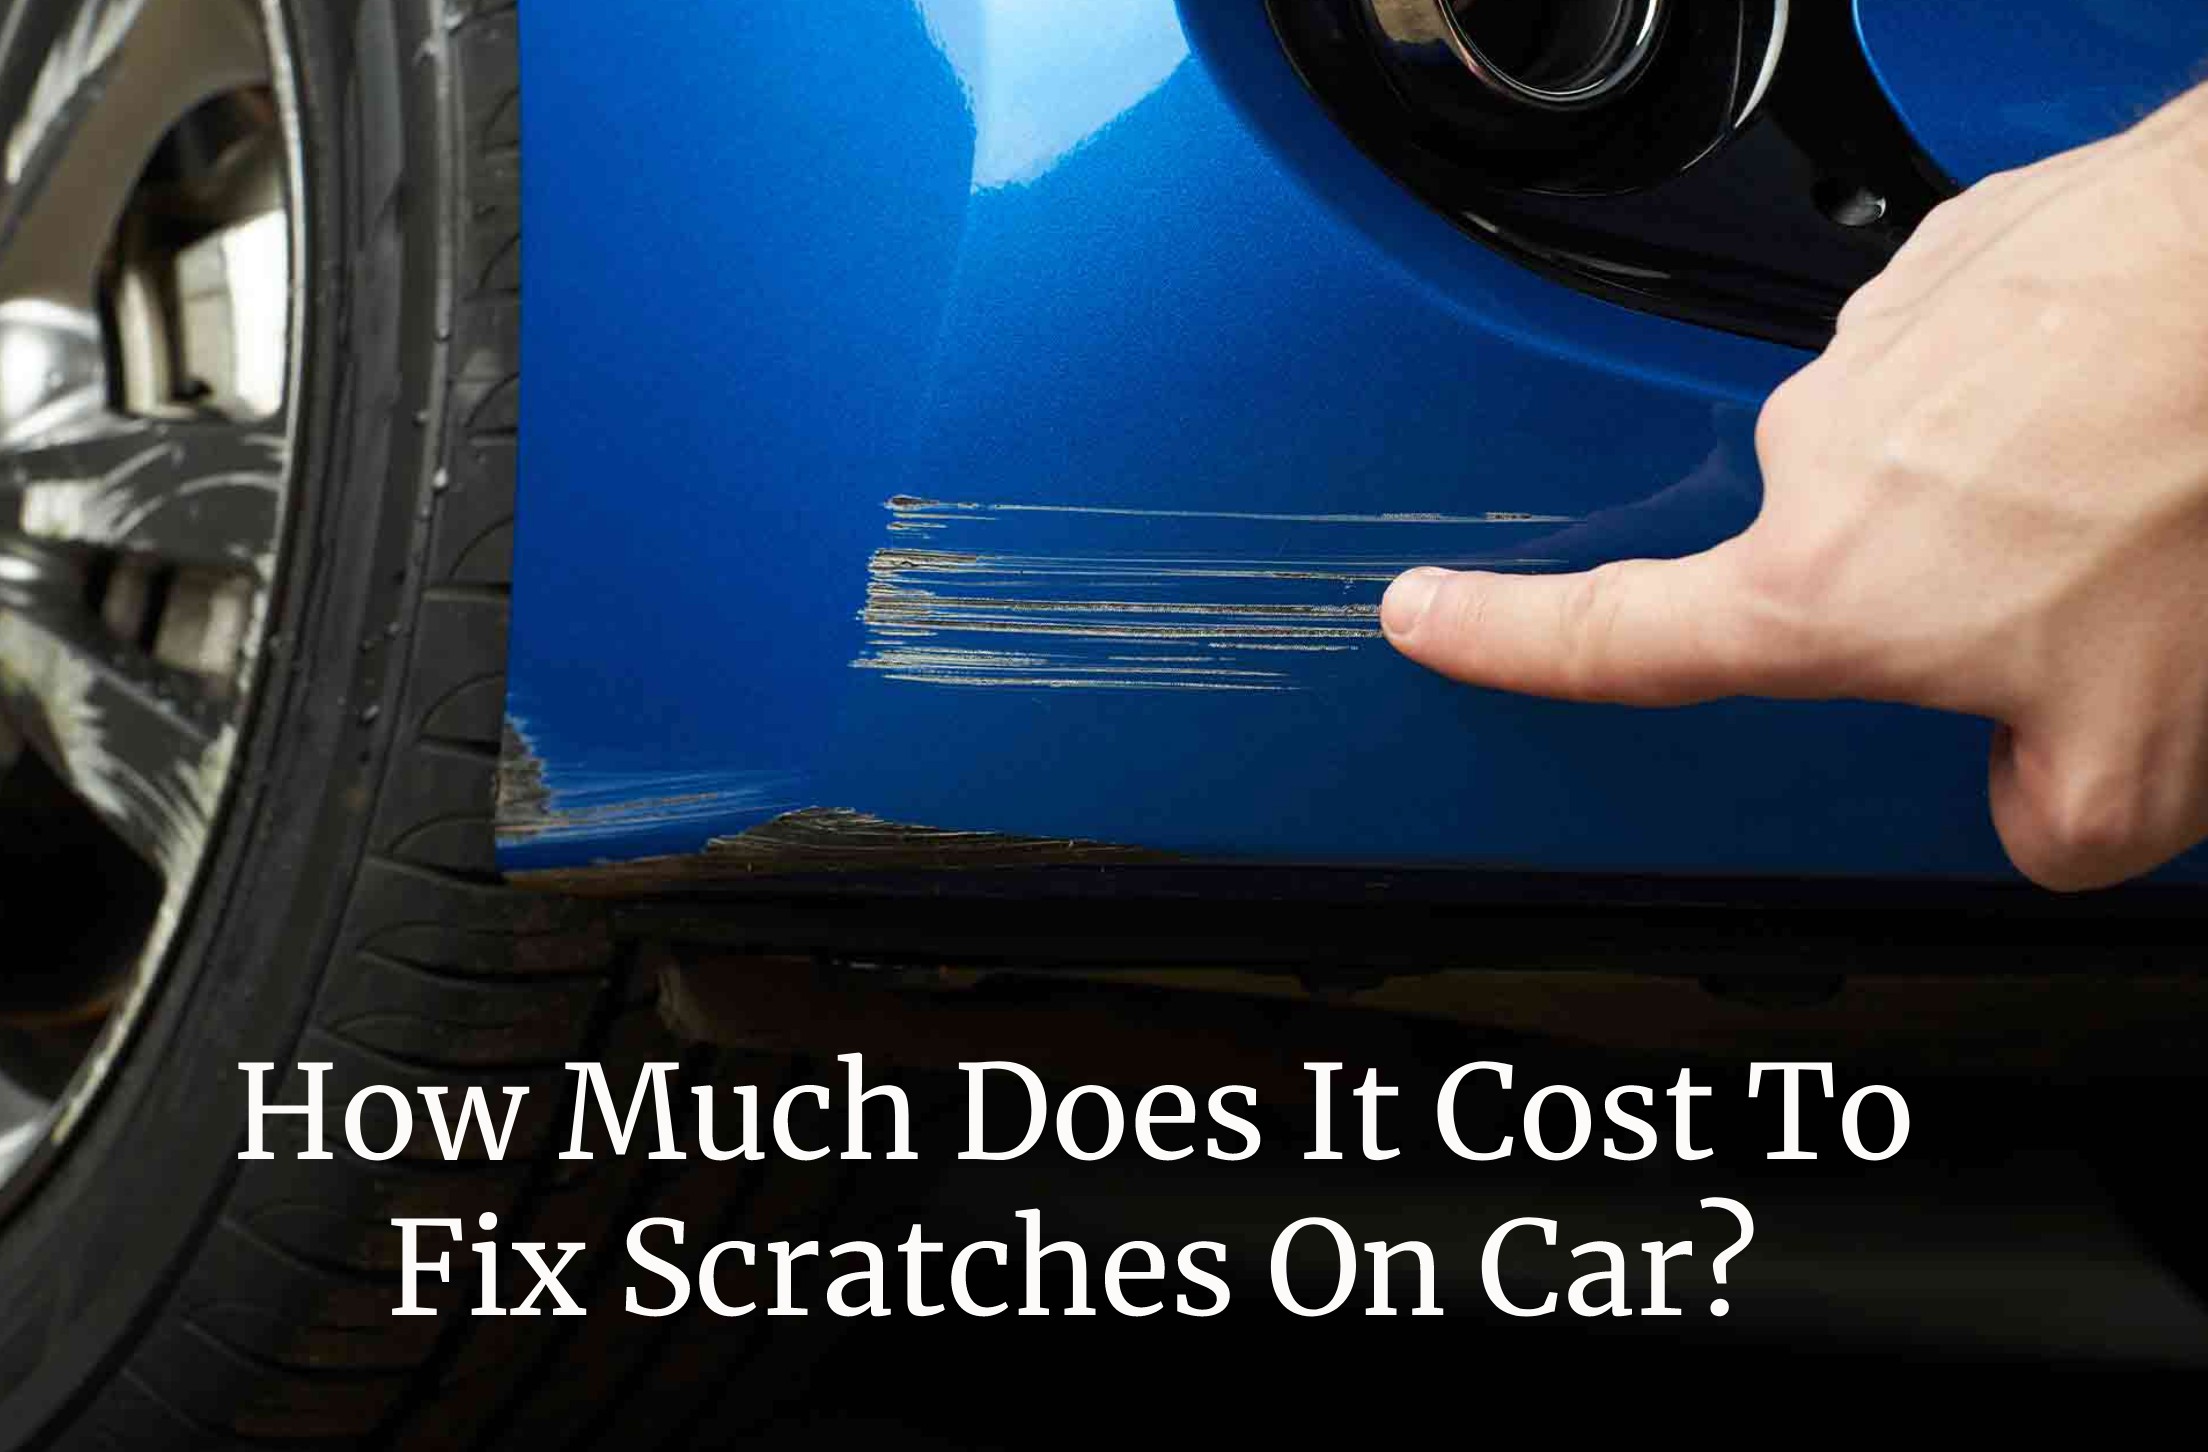 How Much Does It Cost To Fix Scratches On Car